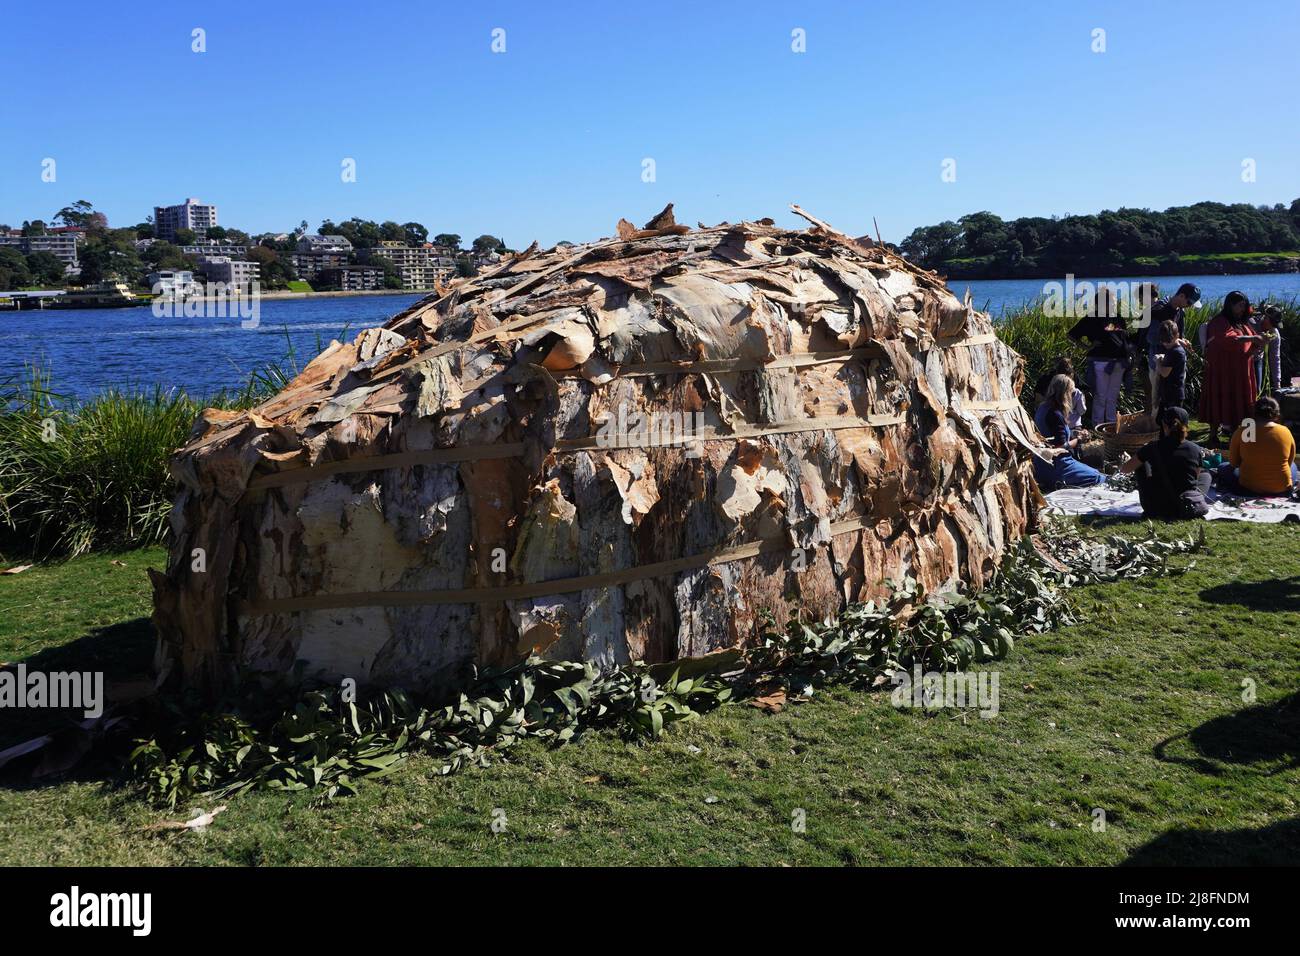 Aboriginal Shelter on Display during a Mother’s Day Breakfast at Barangaroo Reserve Stock Photo